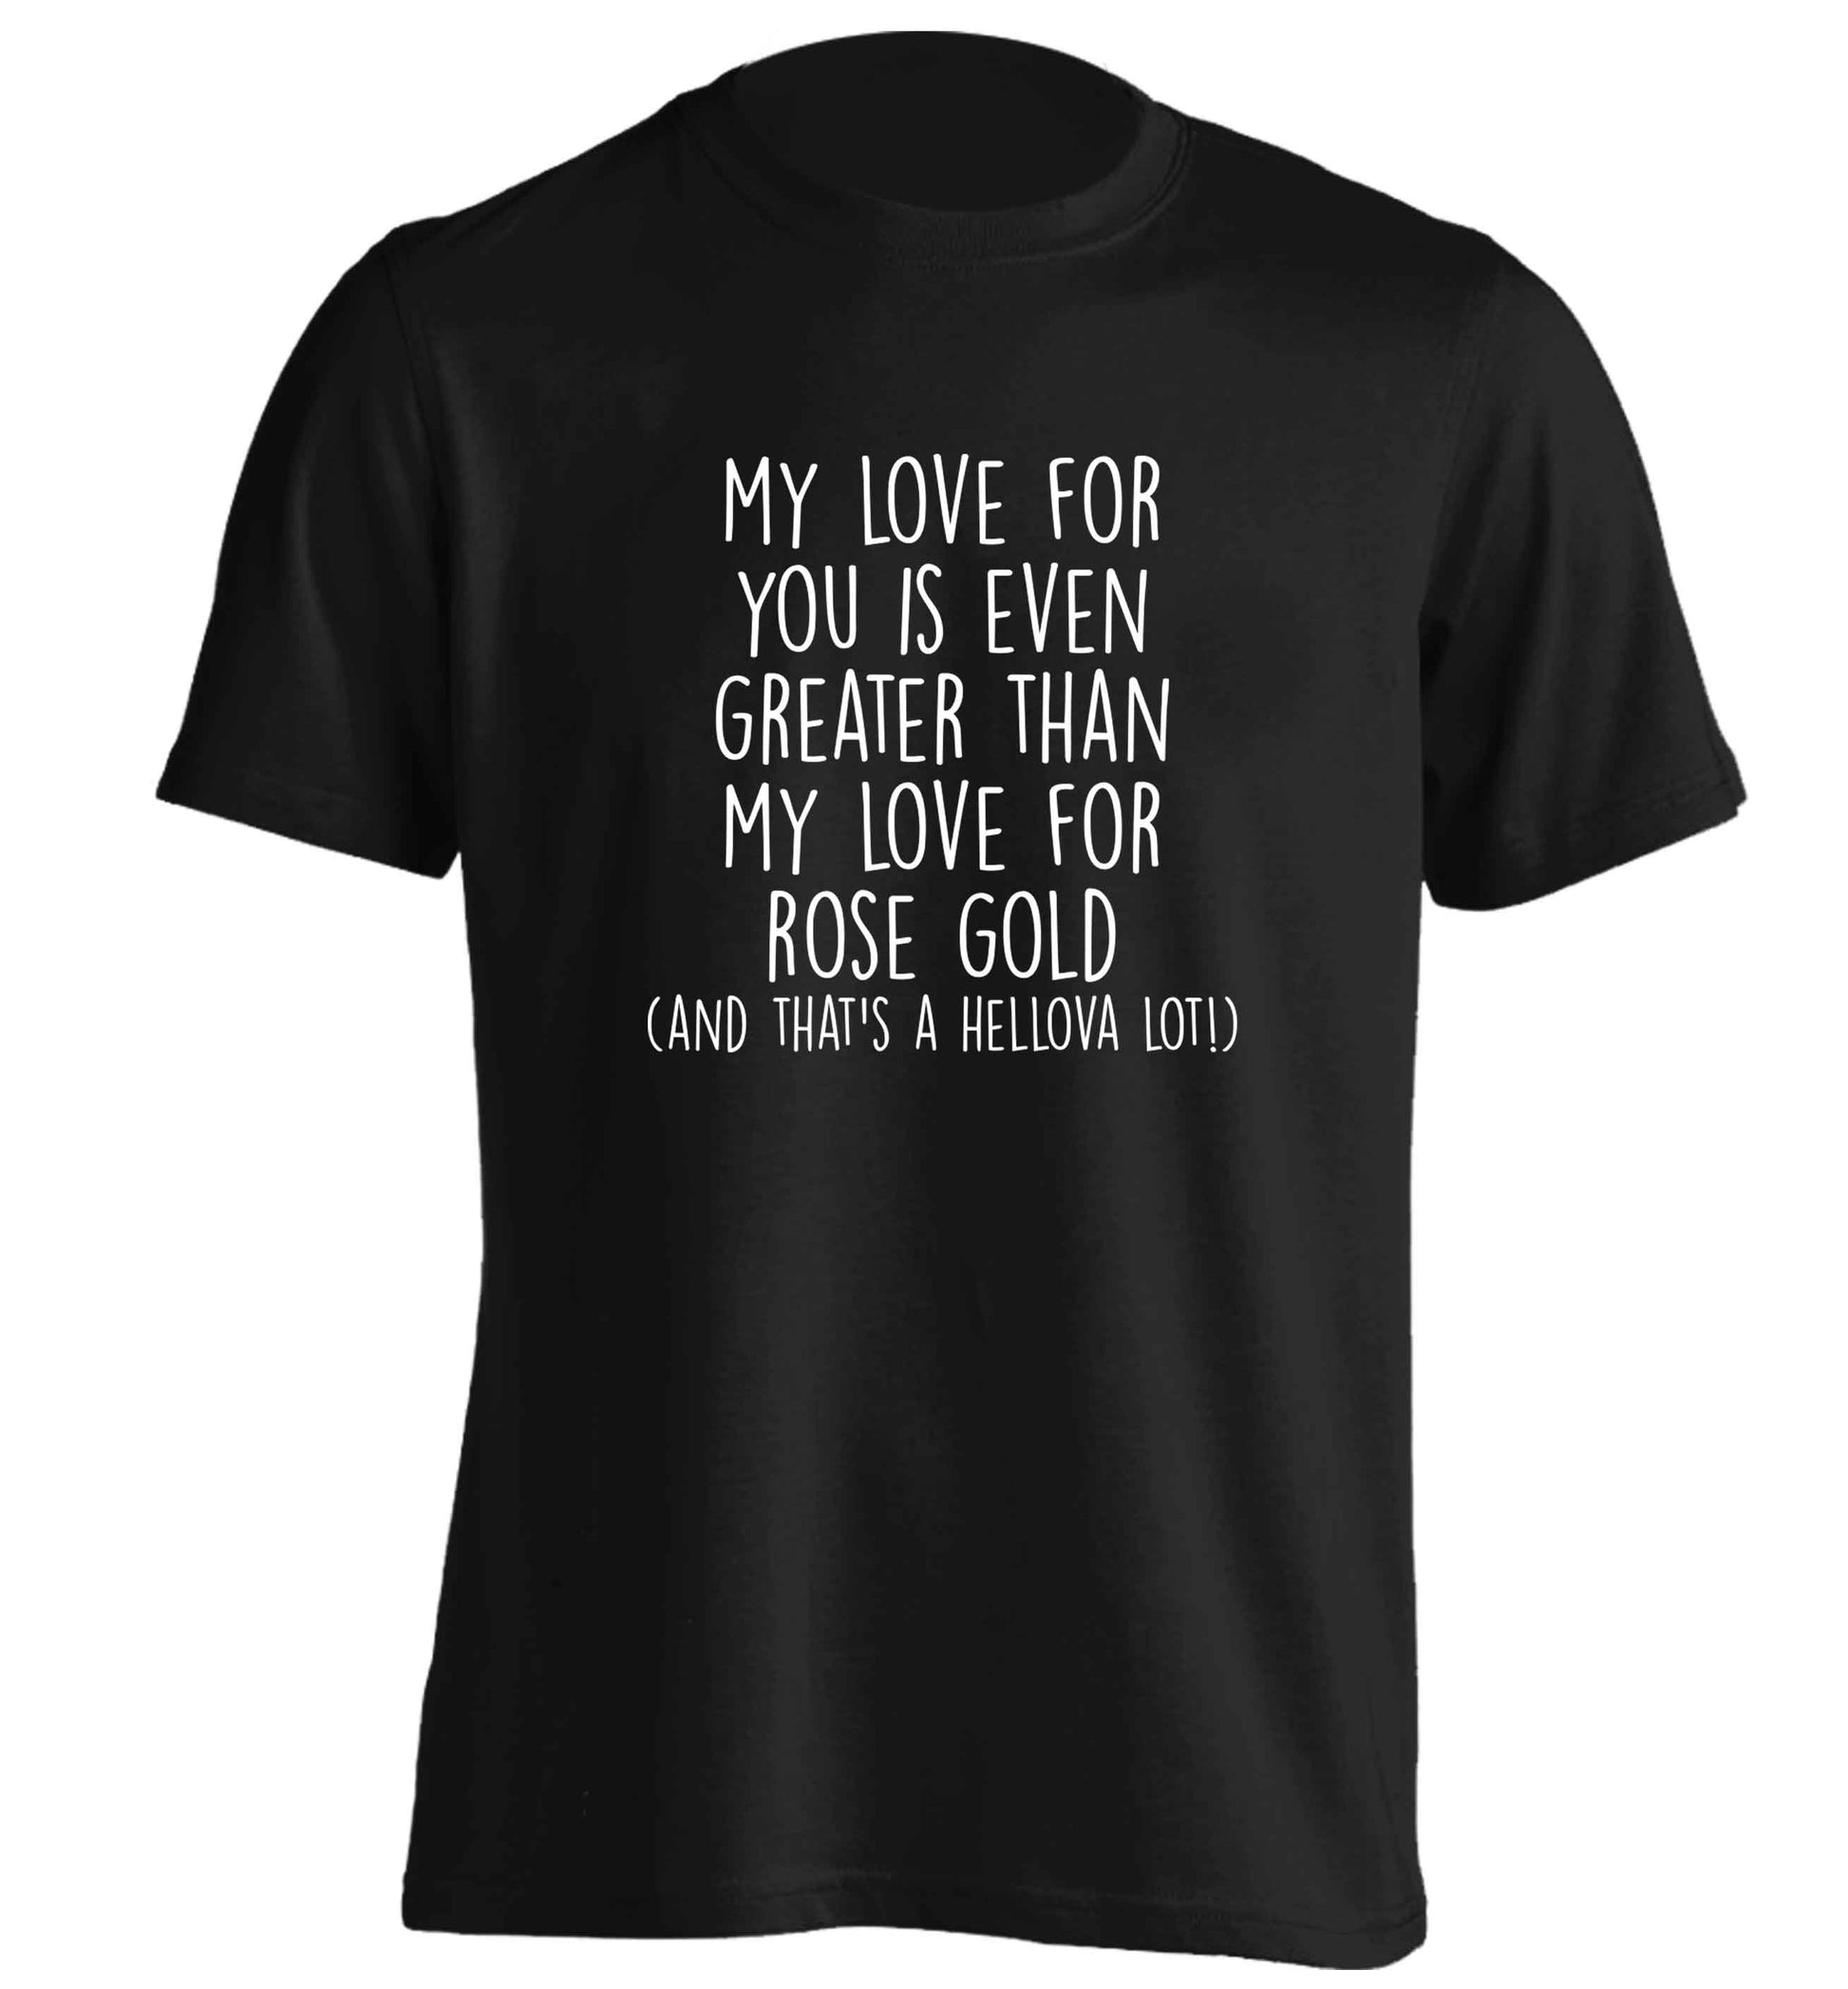 My love for you is even greater than my love for rose gold (and that's a hellova lot) adults unisex black Tshirt 2XL